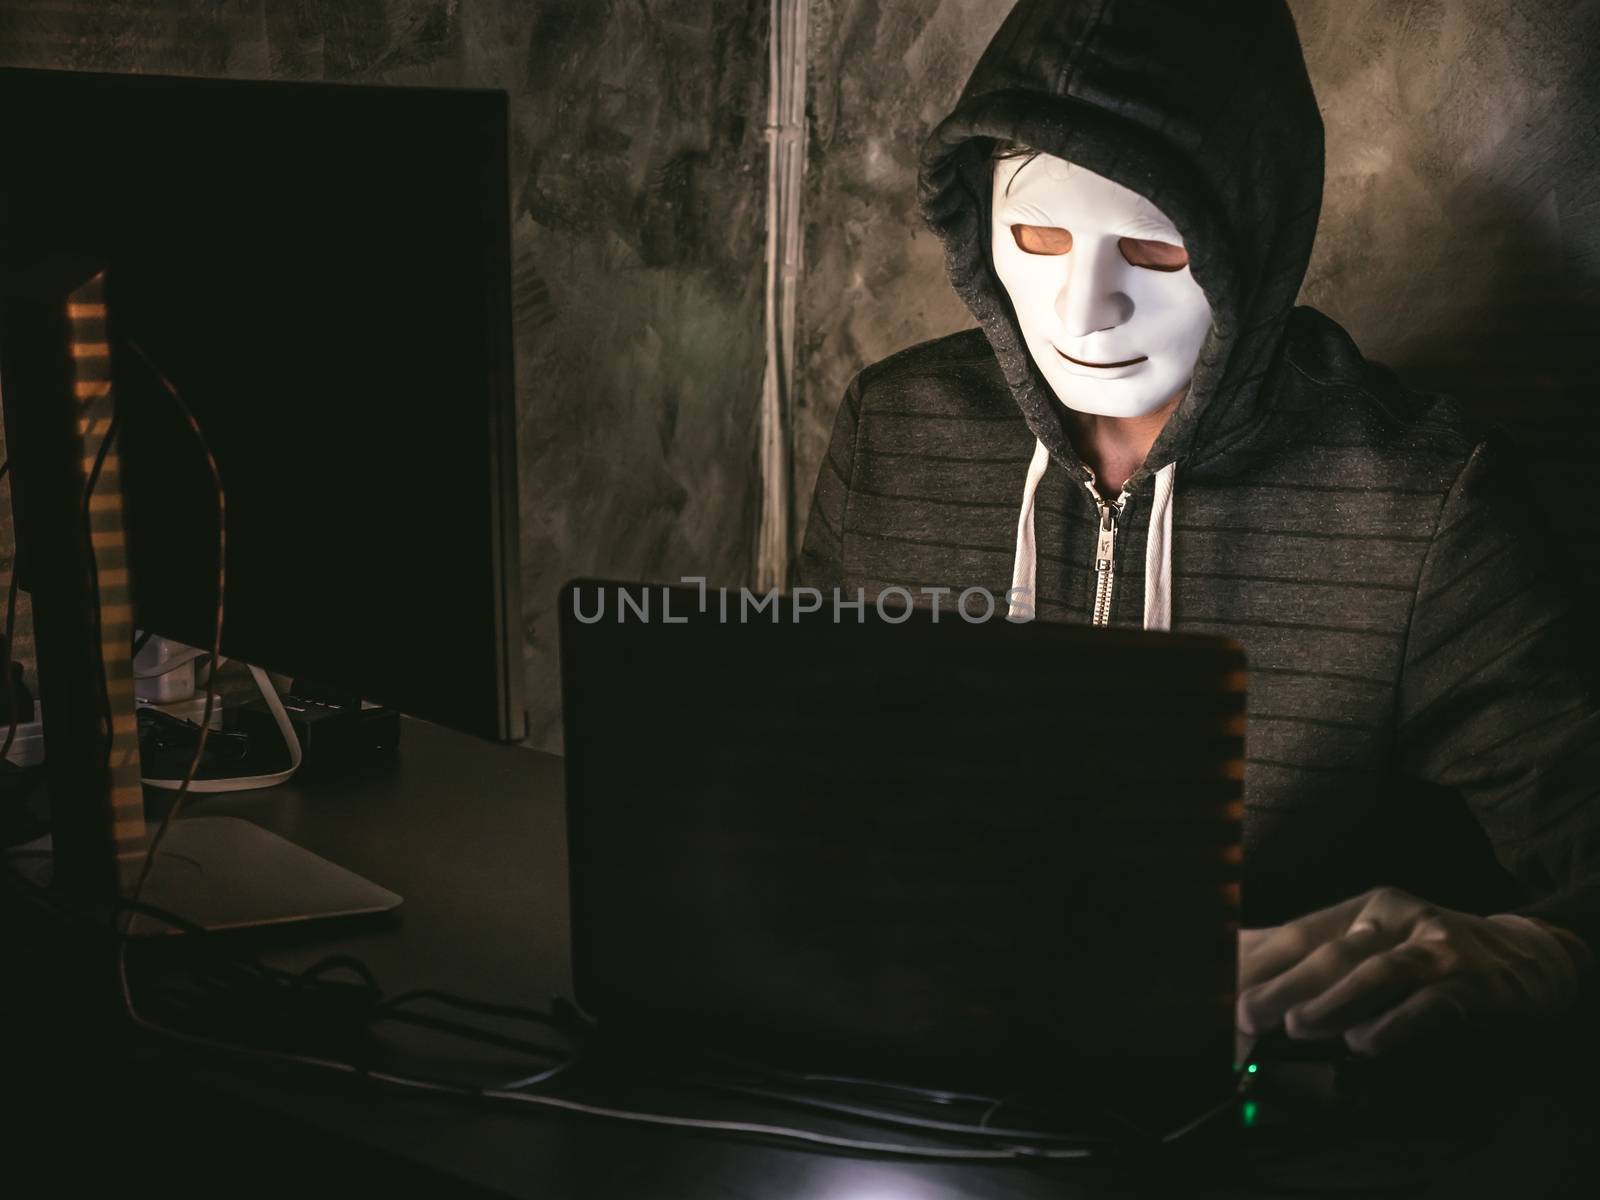 Computer hacker - Man in hoodie shirt with mask stealing data from laptop